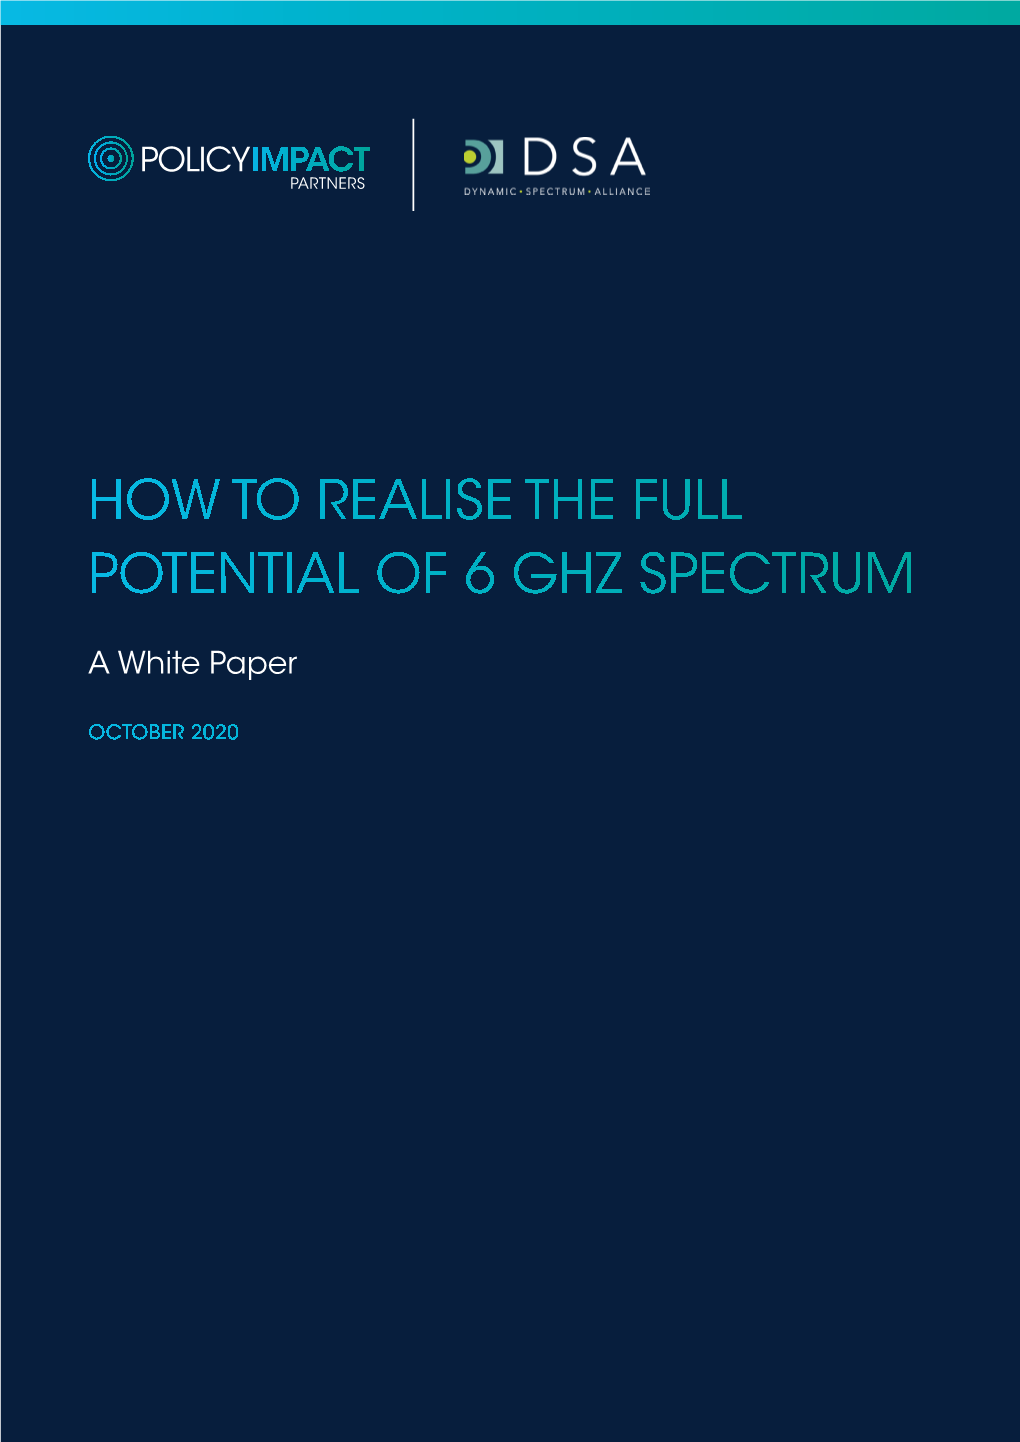 How to Realise the Full Potential of 6 Ghz Spectrum